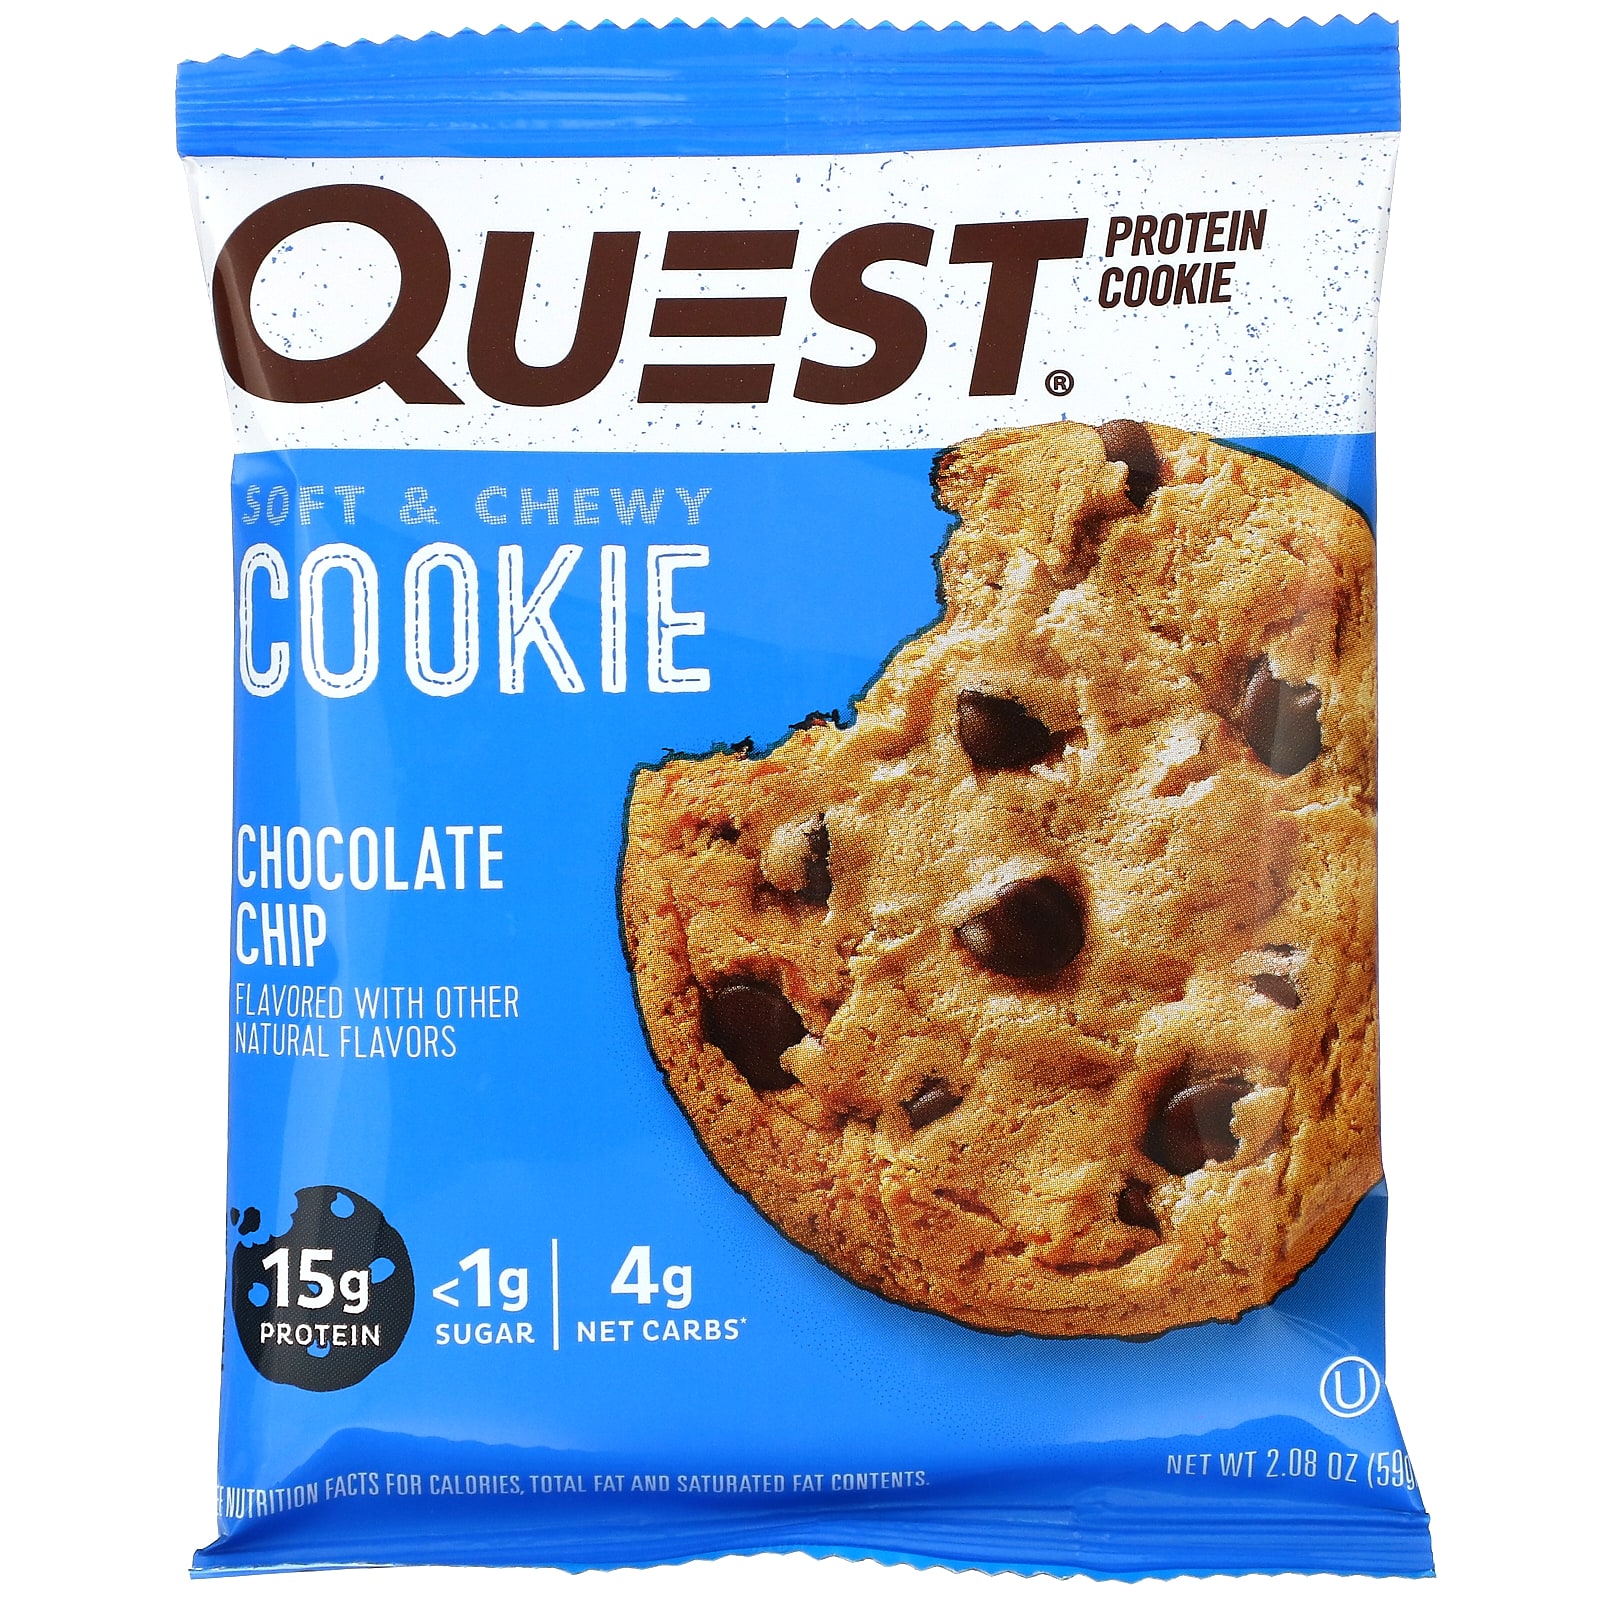 SALE／60%OFF】 プロテインクッキーピーナッツバターチョコレートチップ 12個入り Quest Nutrition Protein  Cookie Peanut Butter Chocolate Chip, 12 Cookies